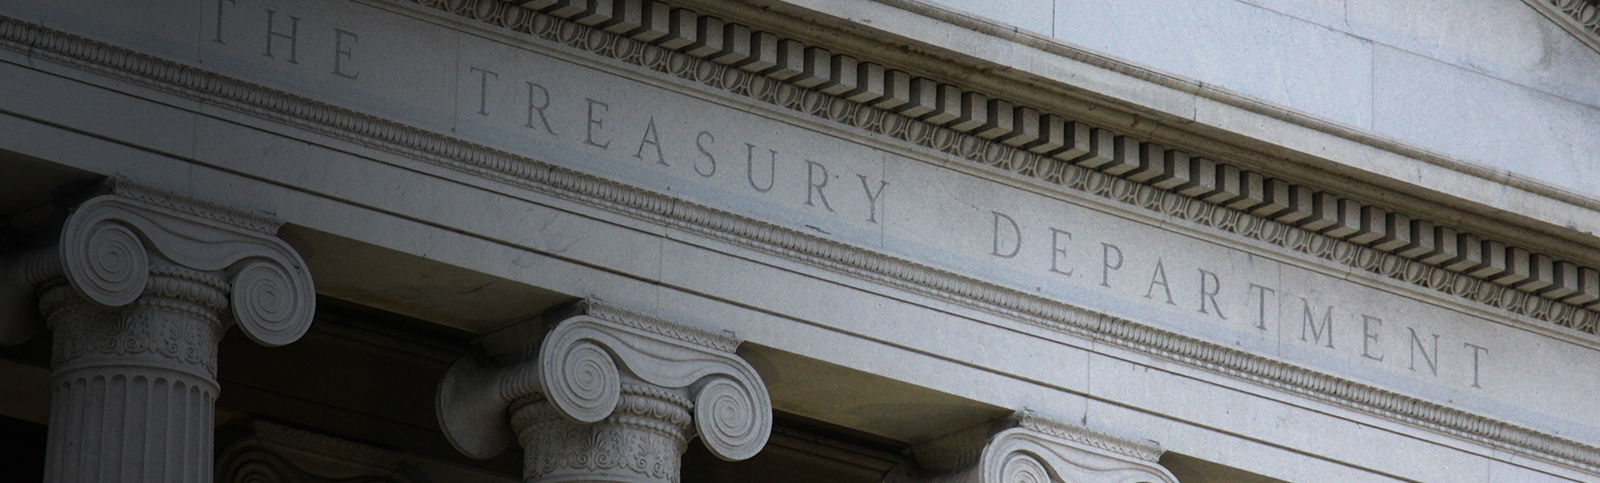 The front of the U.S. Department of Treasury building that reads “The Treasury Department”